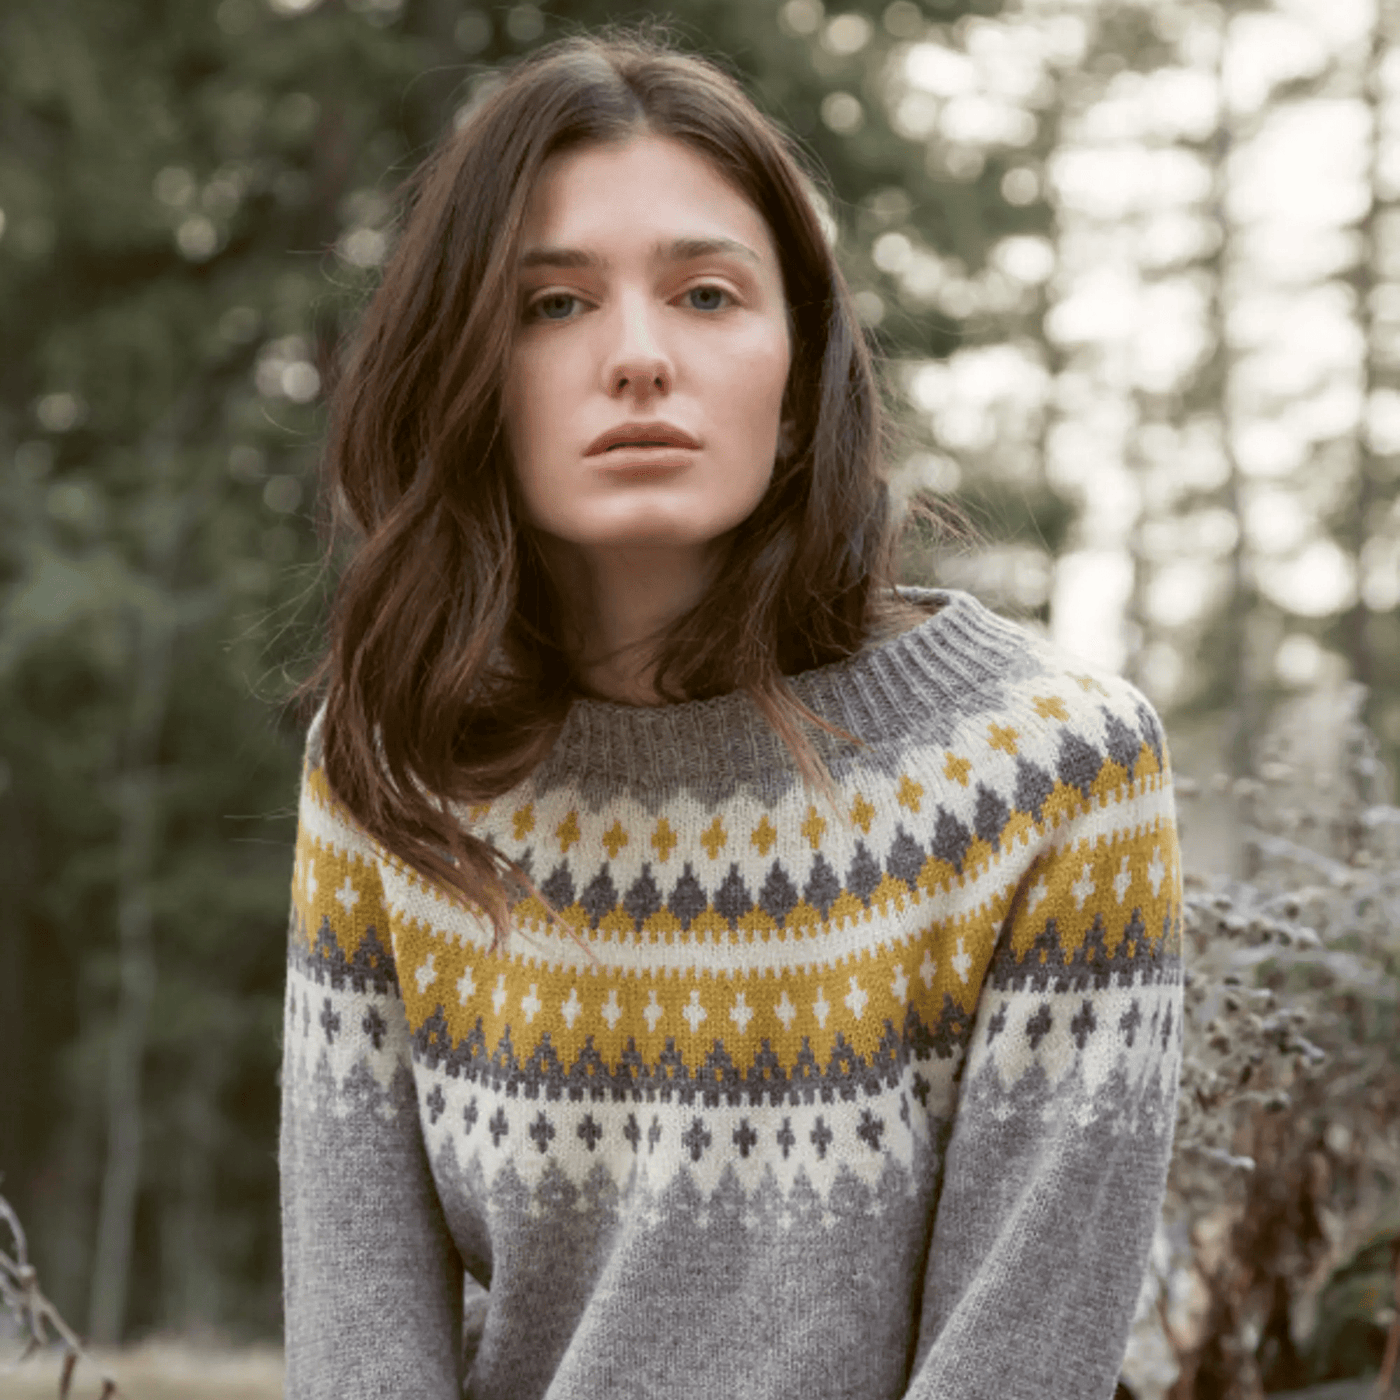 The Woolly Thistle Varde Yoke Sweater 275R in Rauma Finullgarn sweater in grey and pattern with yellow, white, and dark grey